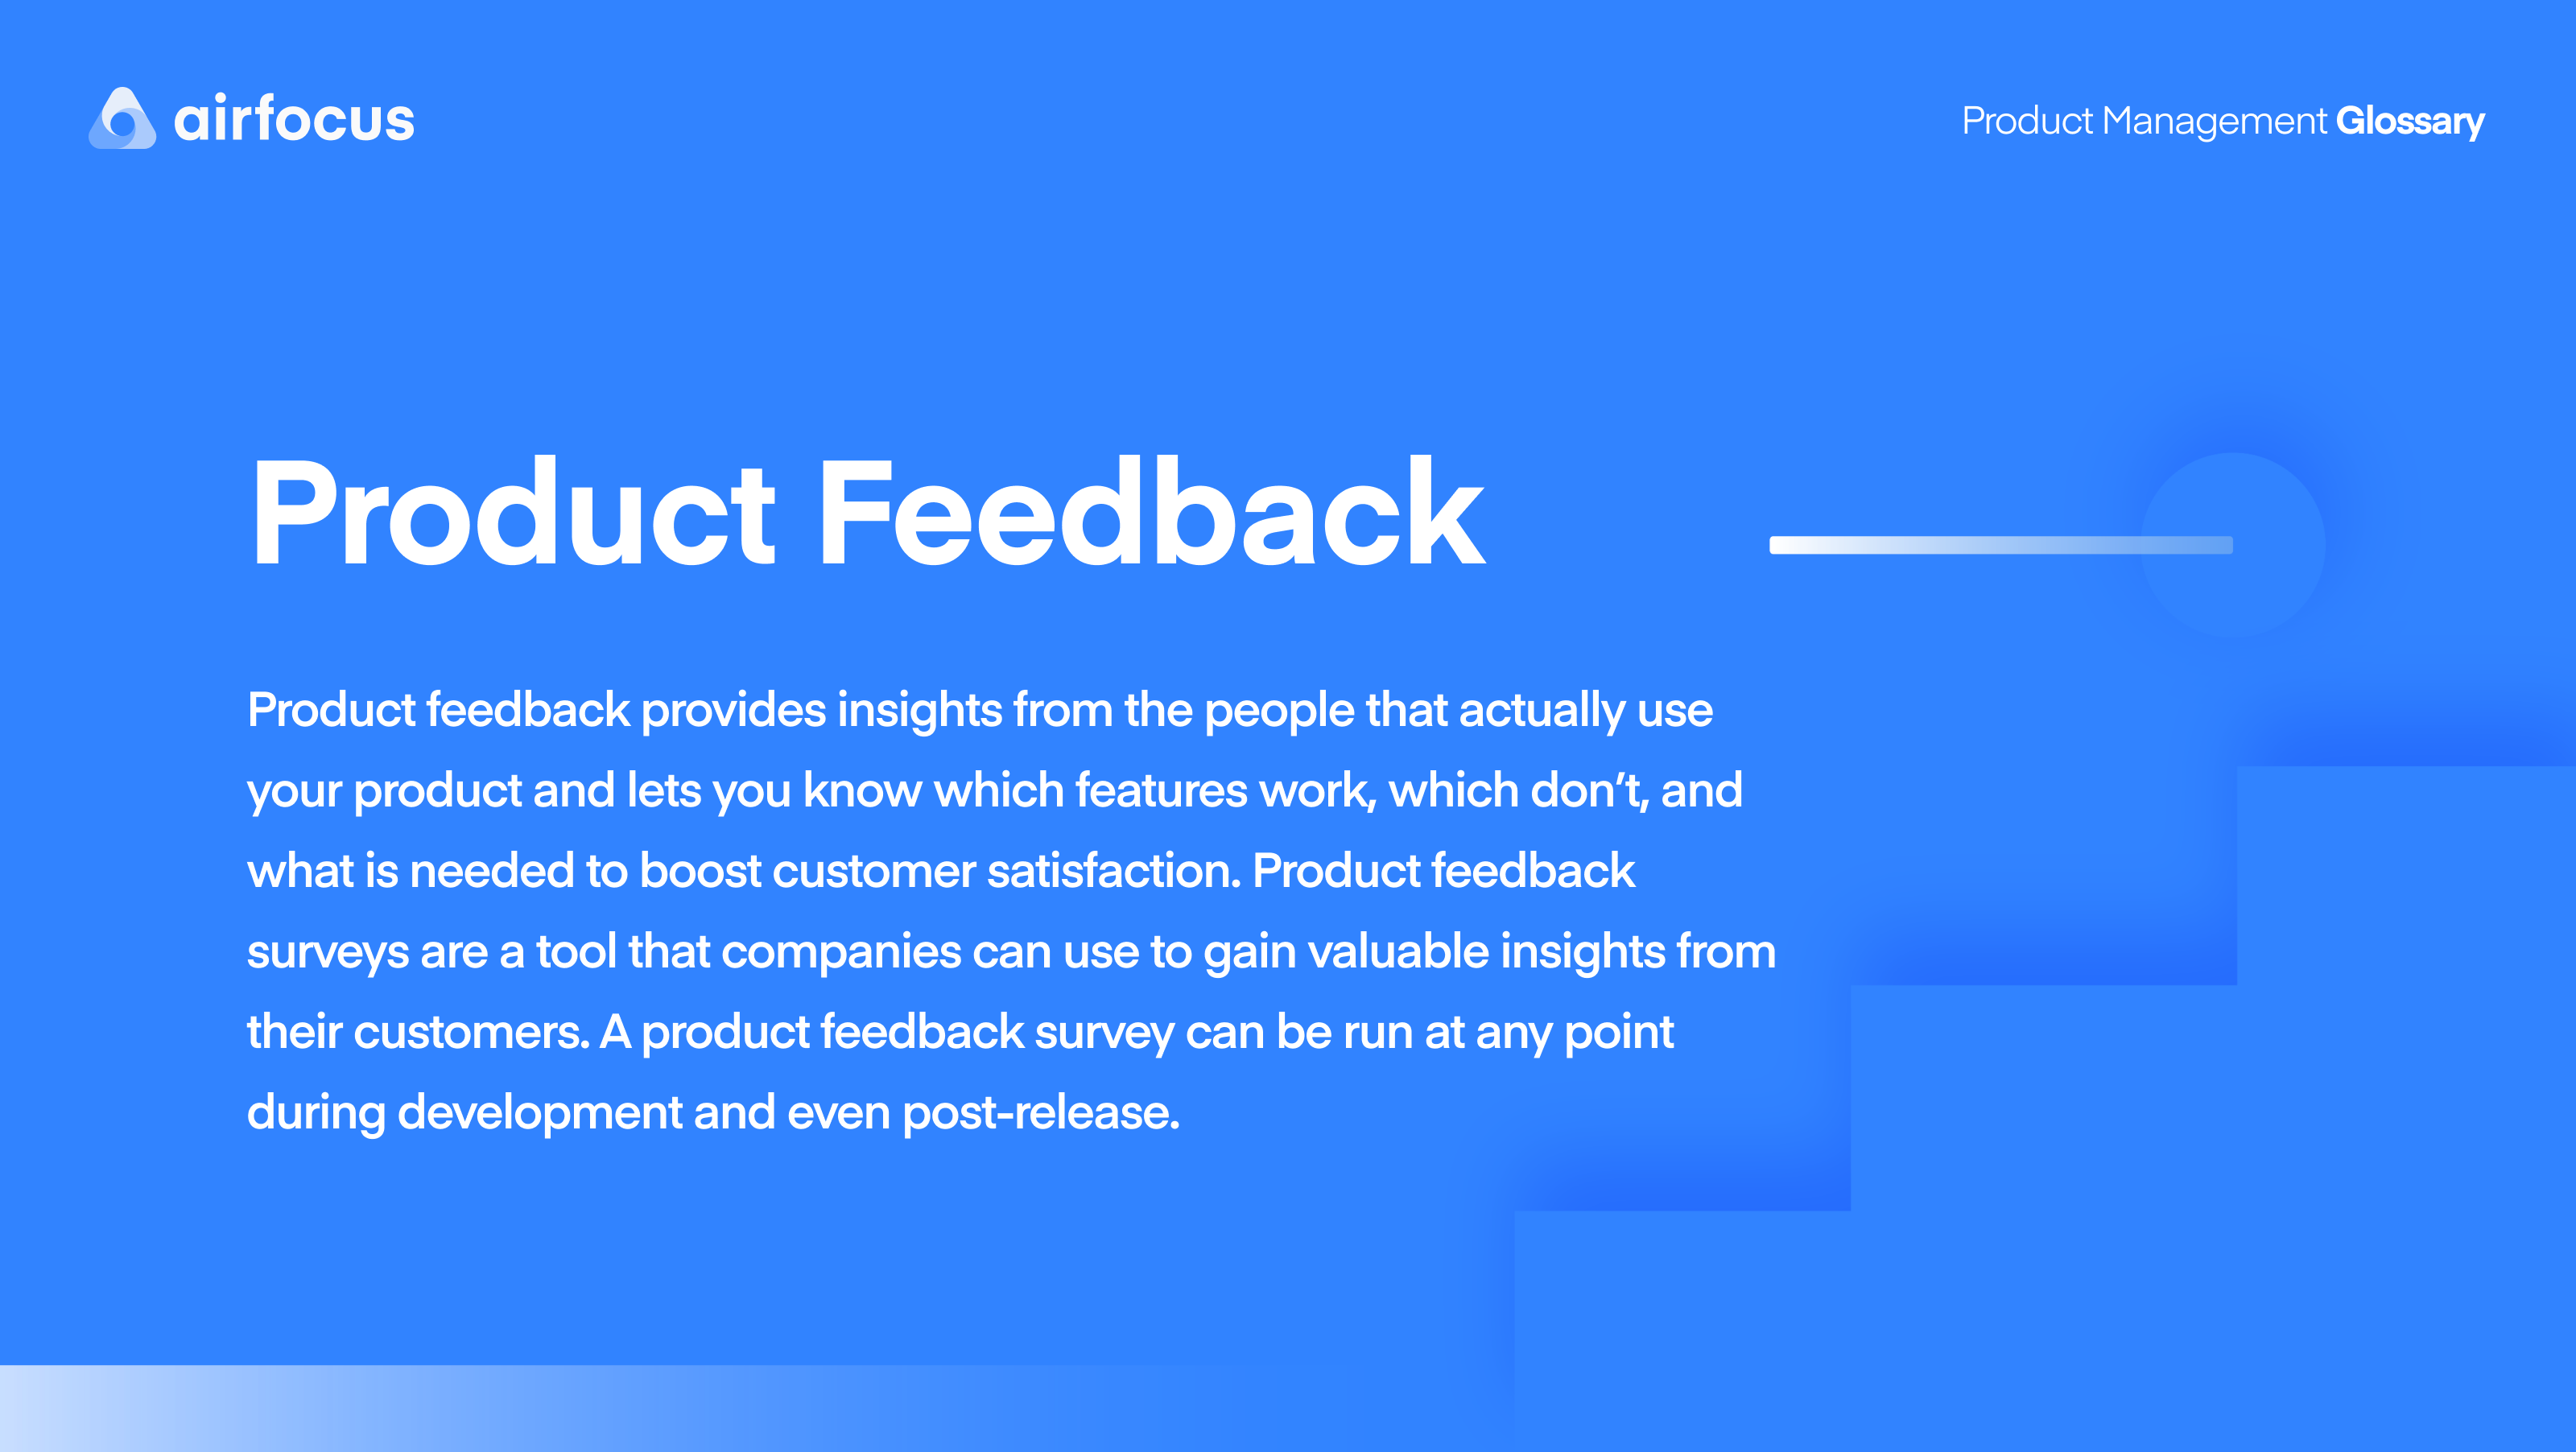 Sample products for feedback